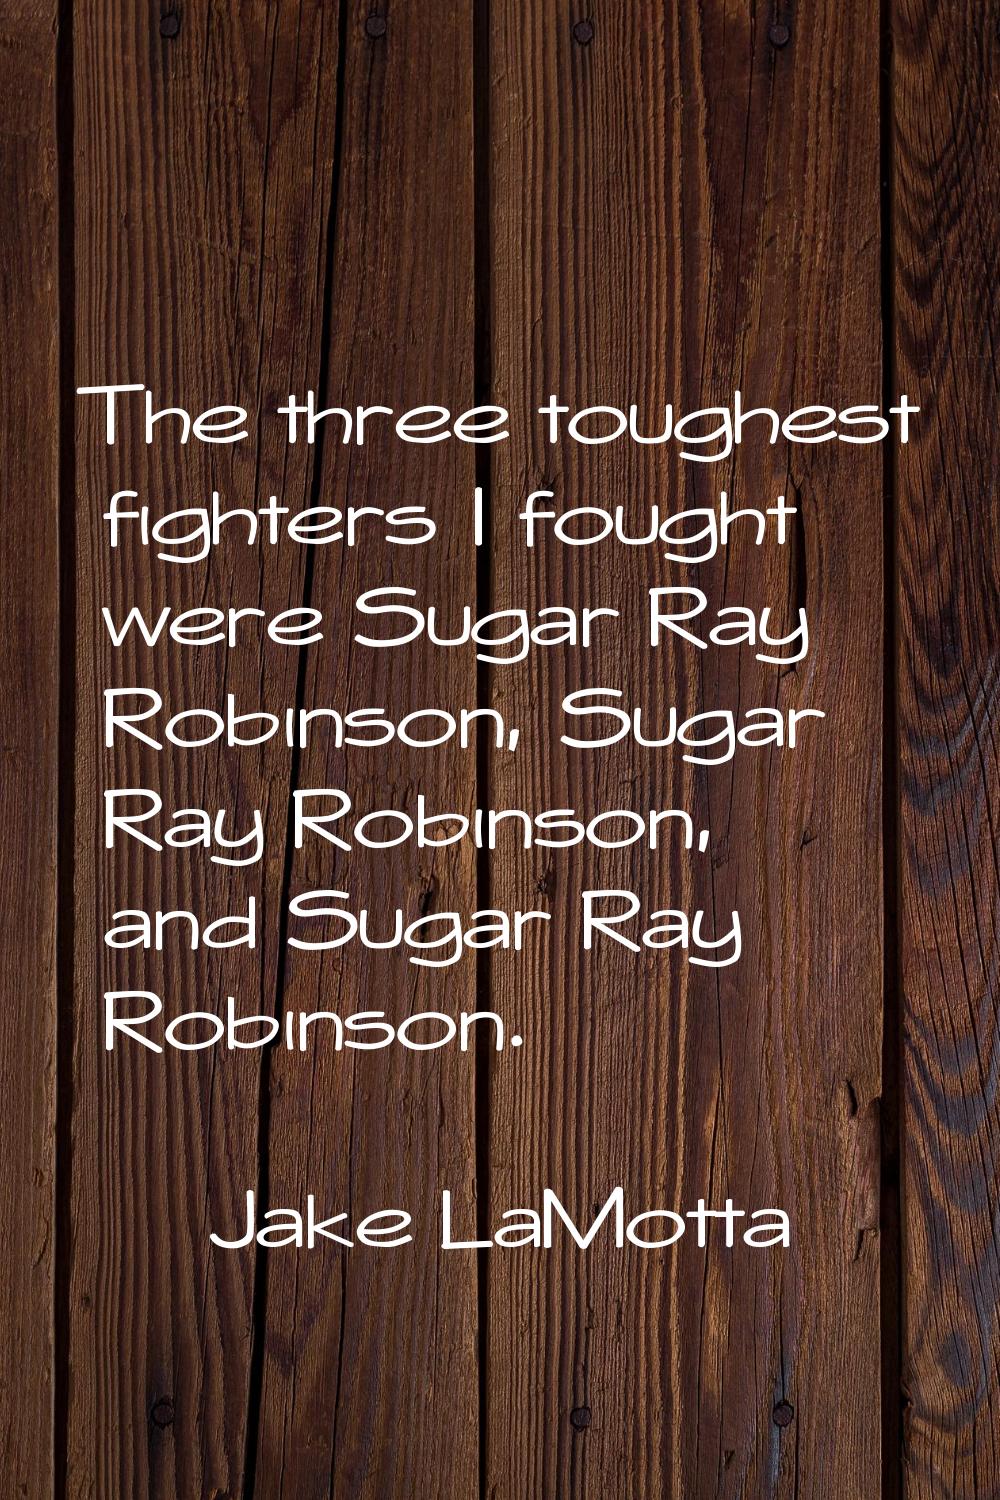 The three toughest fighters I fought were Sugar Ray Robinson, Sugar Ray Robinson, and Sugar Ray Rob